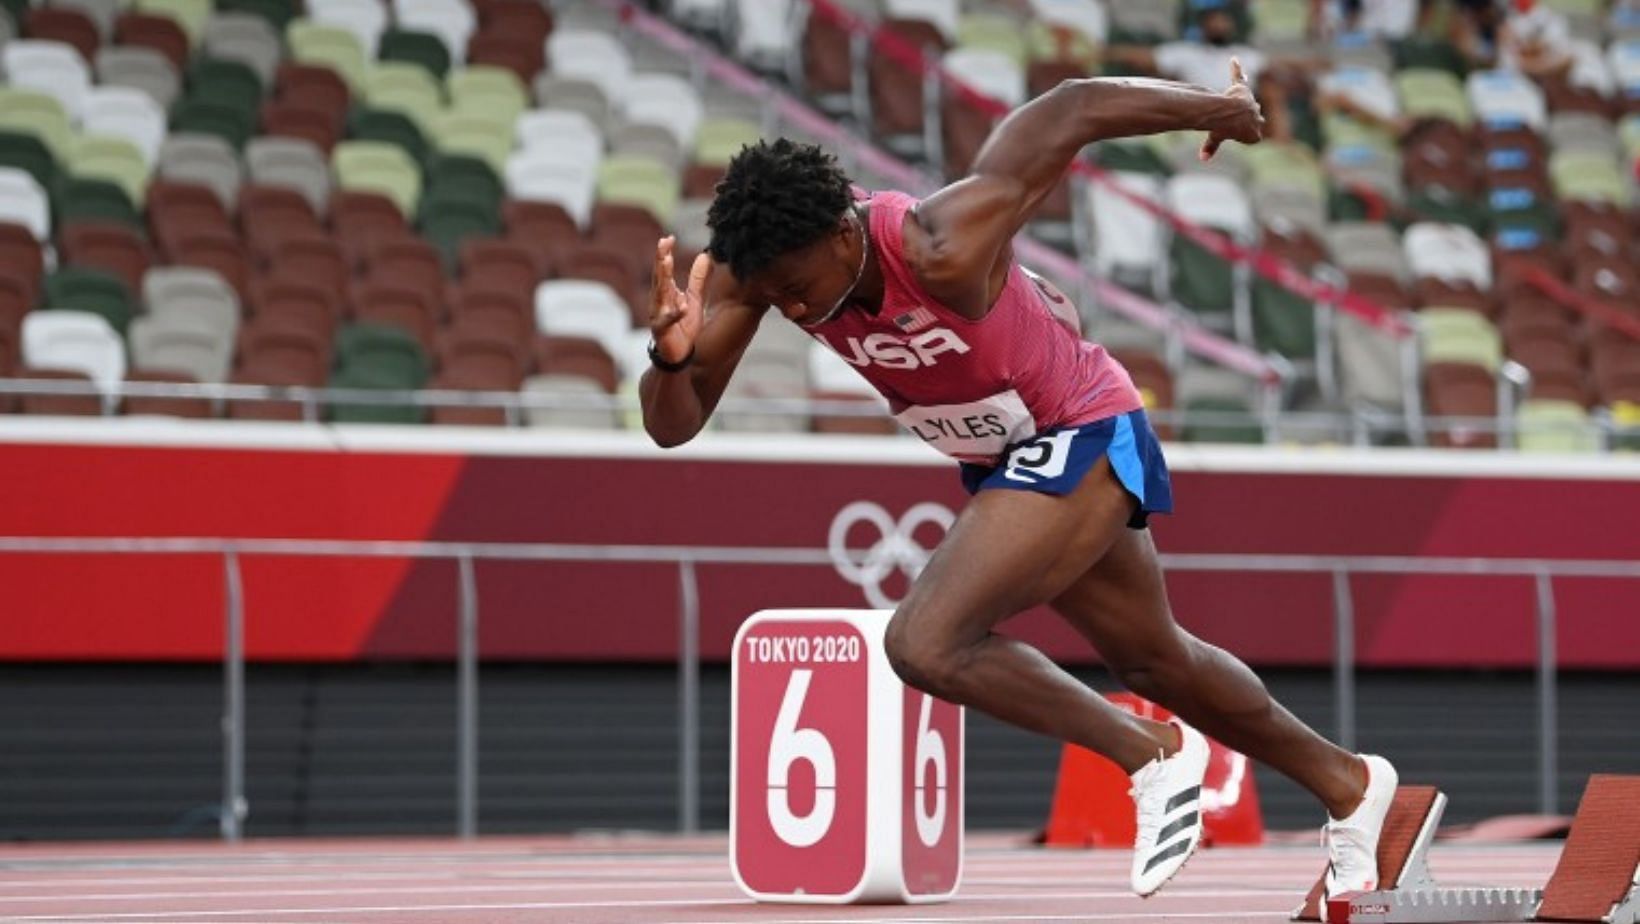 Noah Lyles shared what his sprint training session looks like